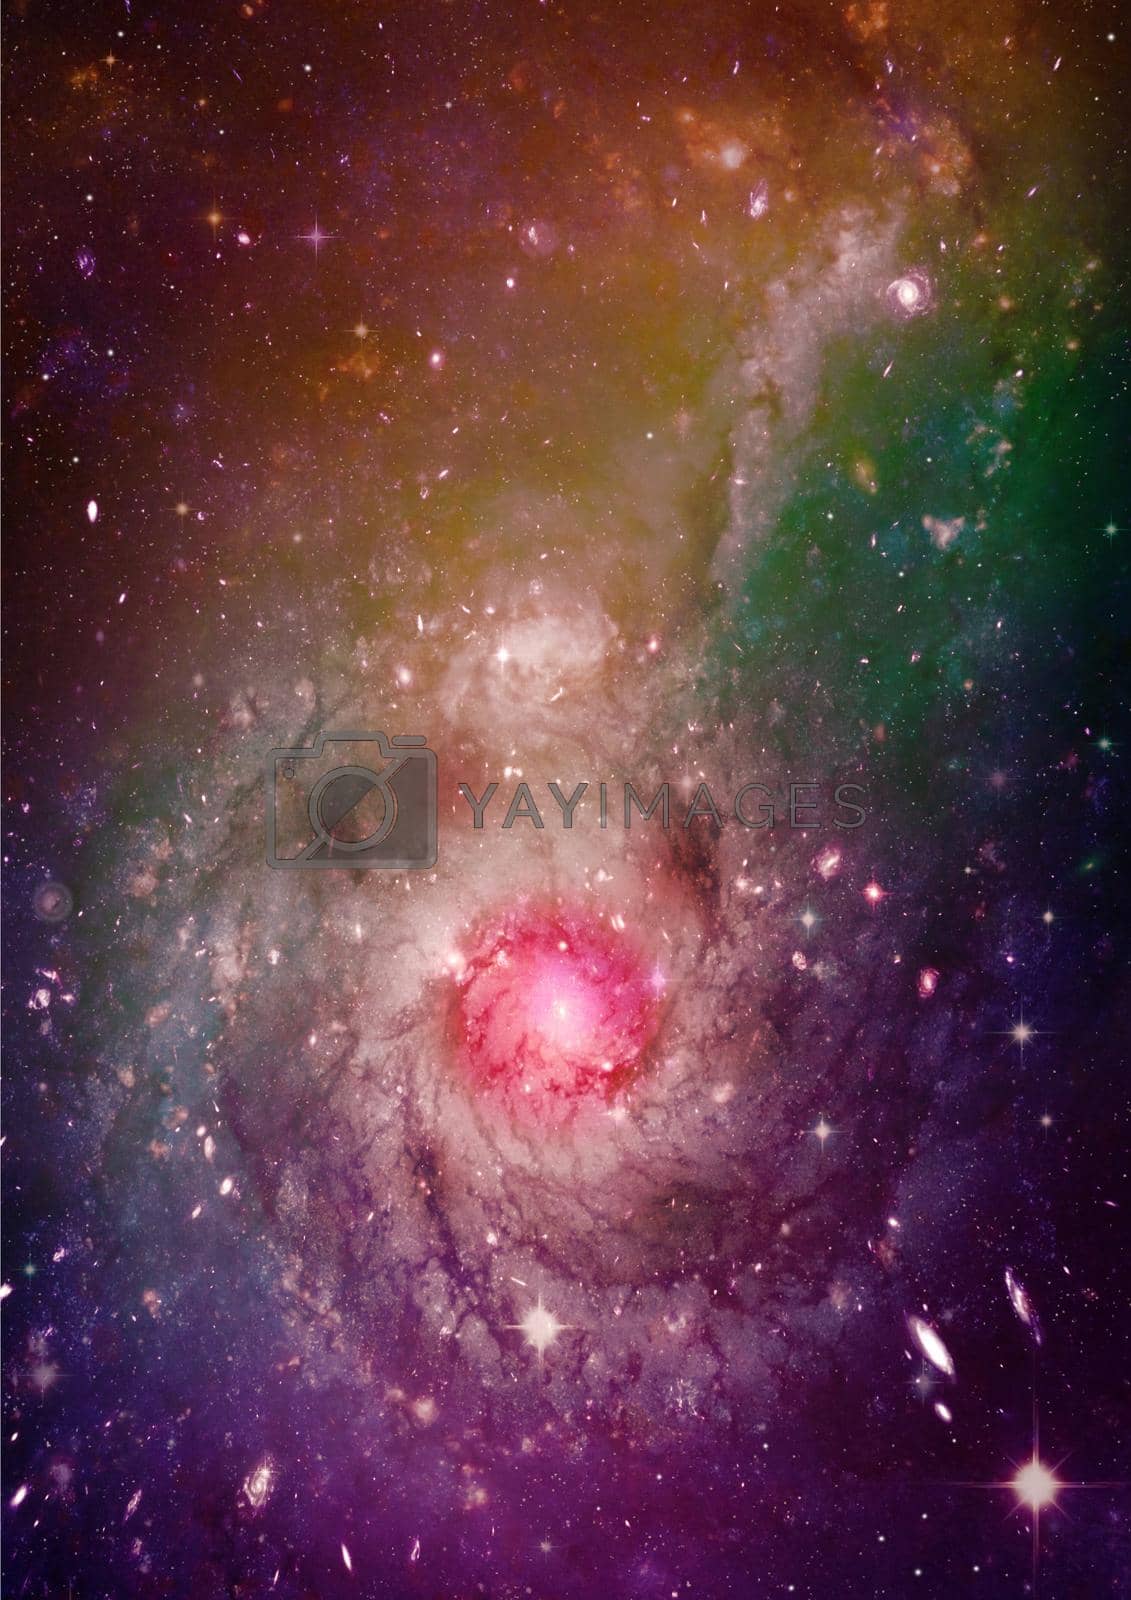 Royalty free image of Far away spiral galaxy by richter1910